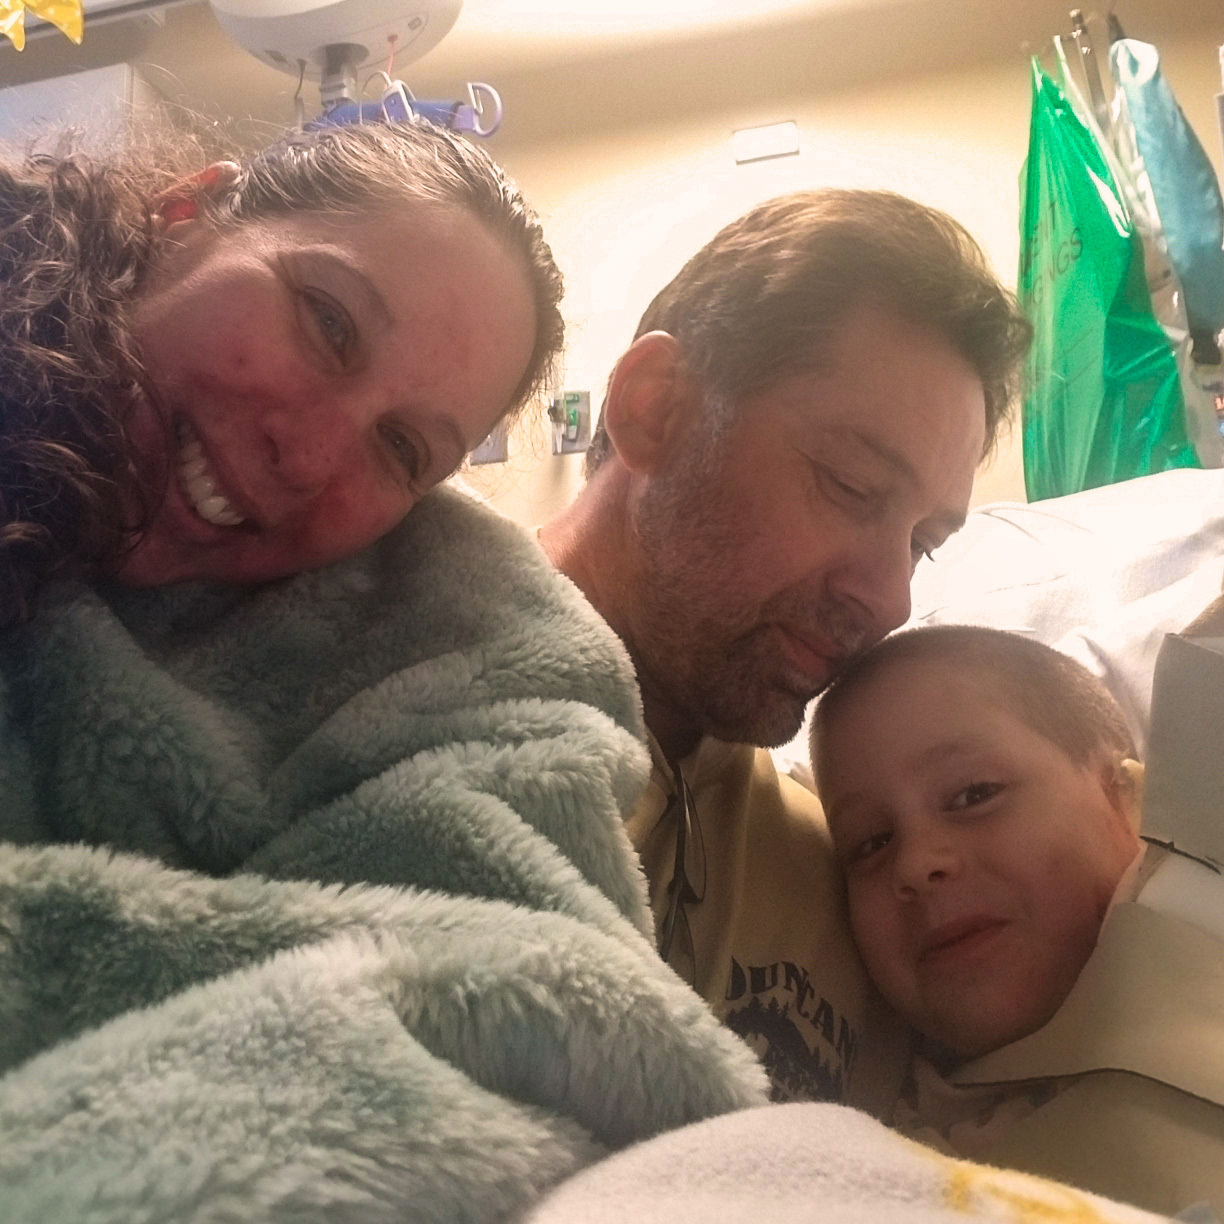 The Olsons hugging in the hospital bed.